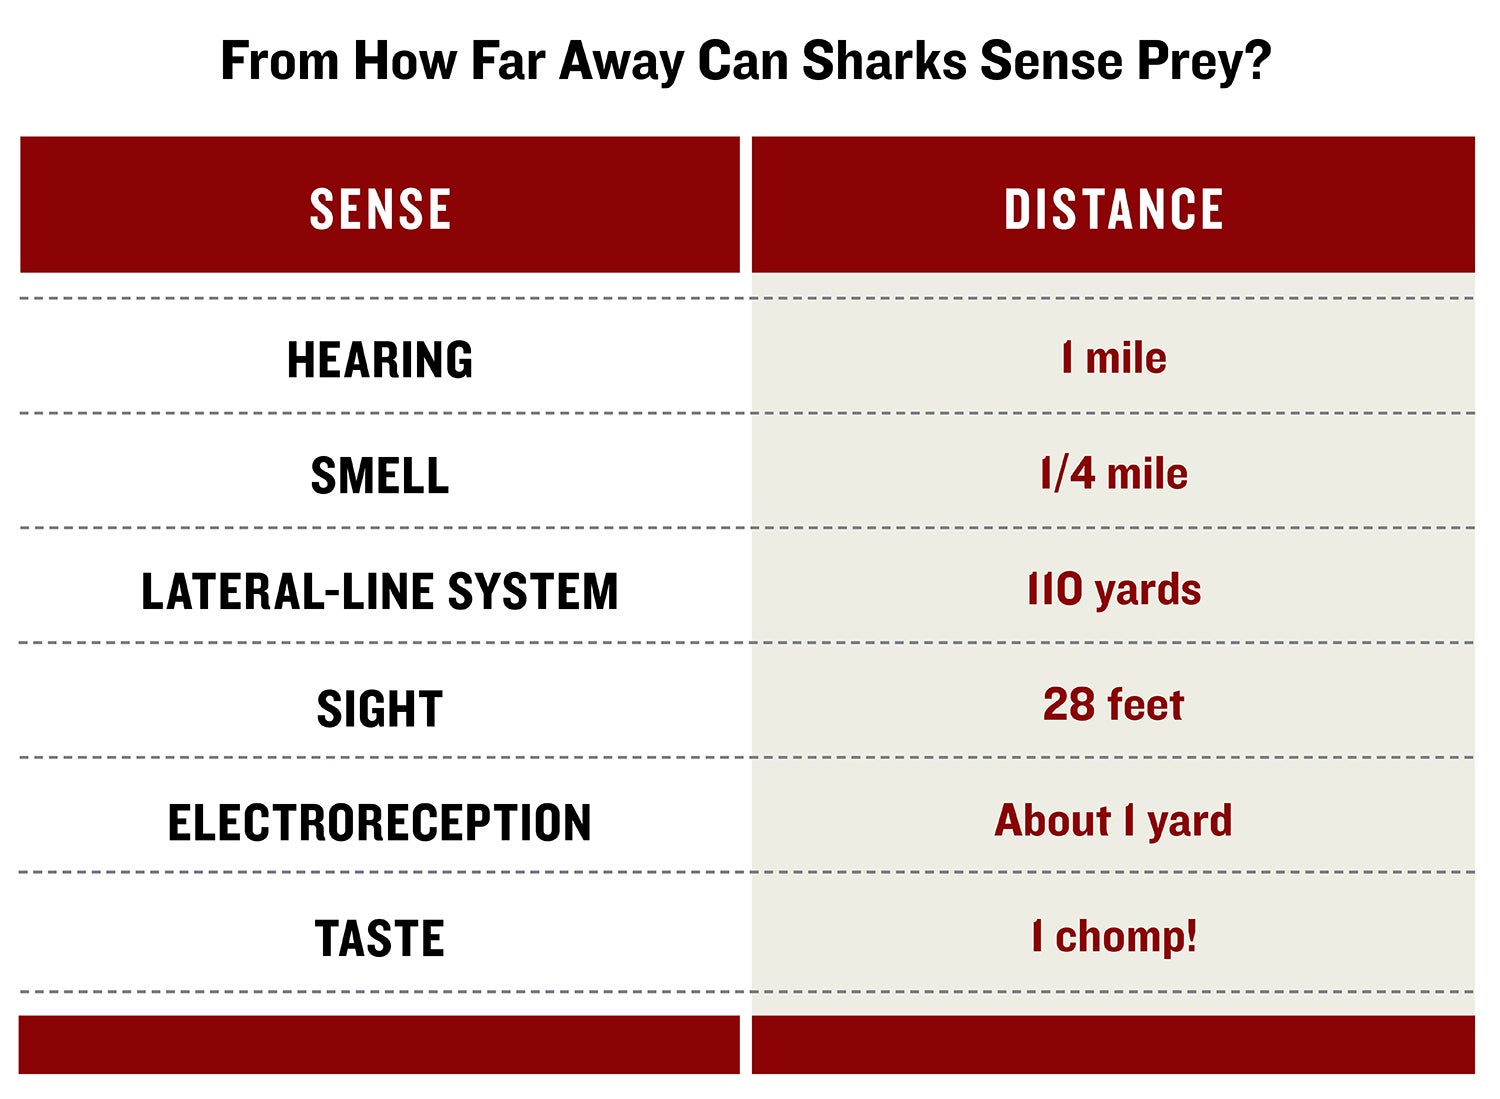 Chart breaking down sharks' senses and the effectiveness of each